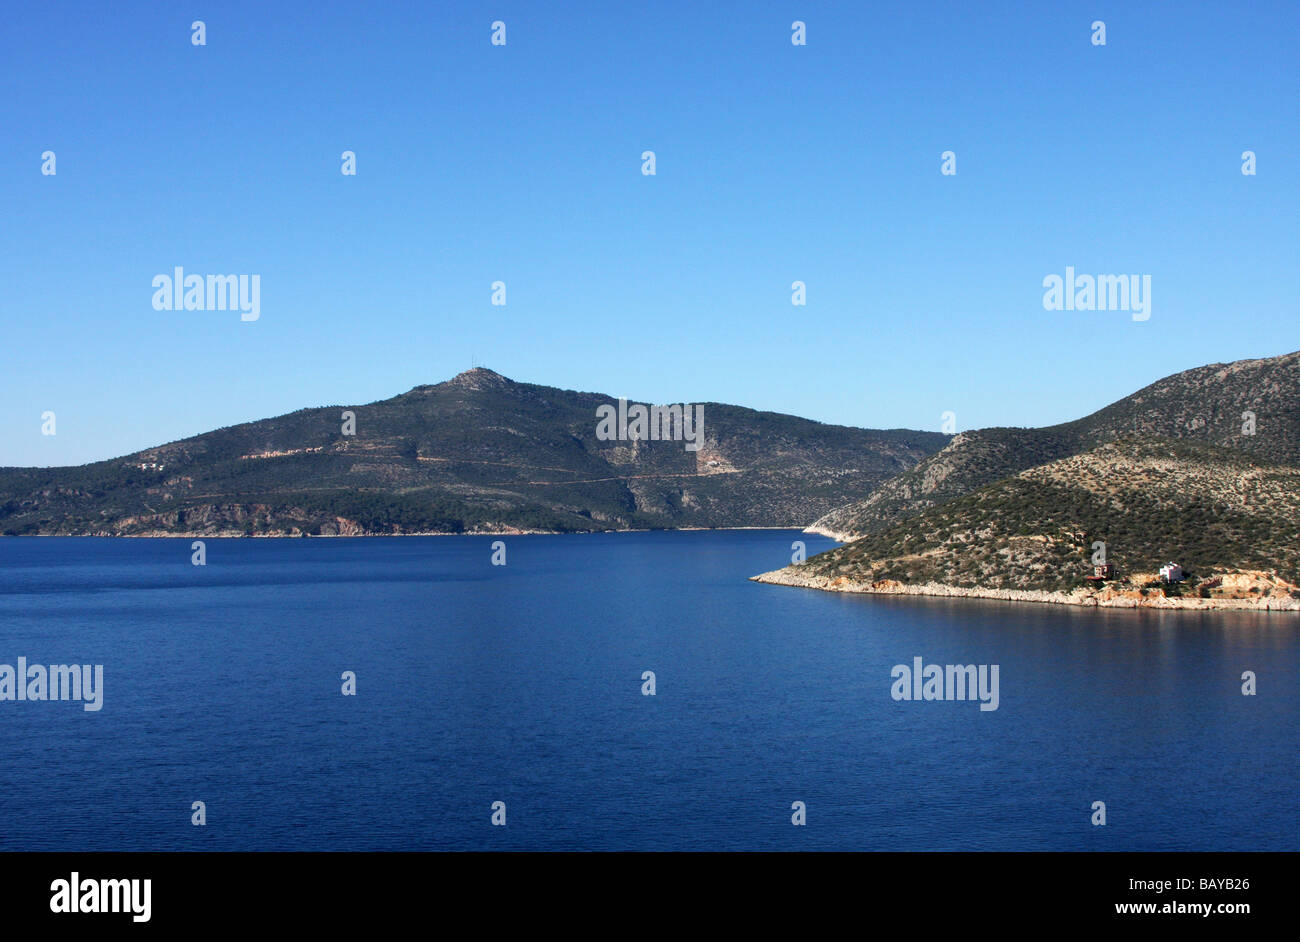 Seascape of the islands off the coast of Turkey between Kas and Kalkan Stock Photo